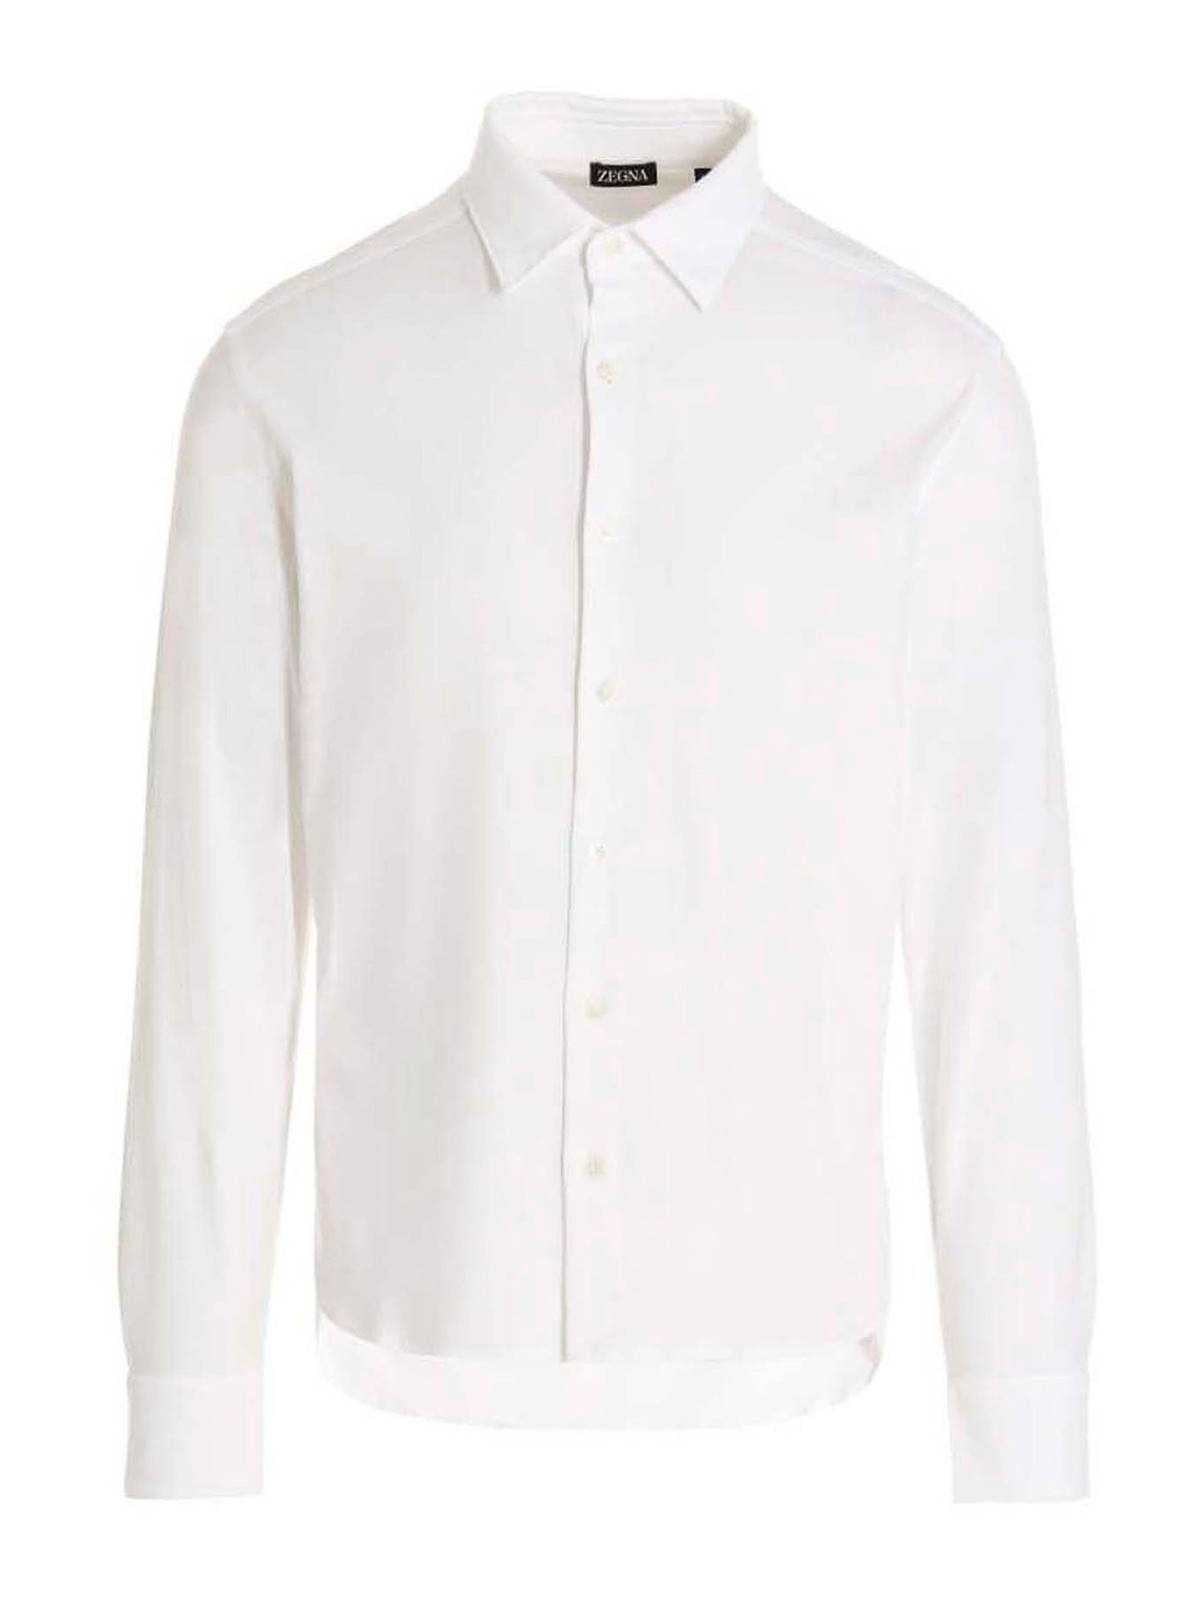 Zegna Long Sleeve Polo Shirt In White